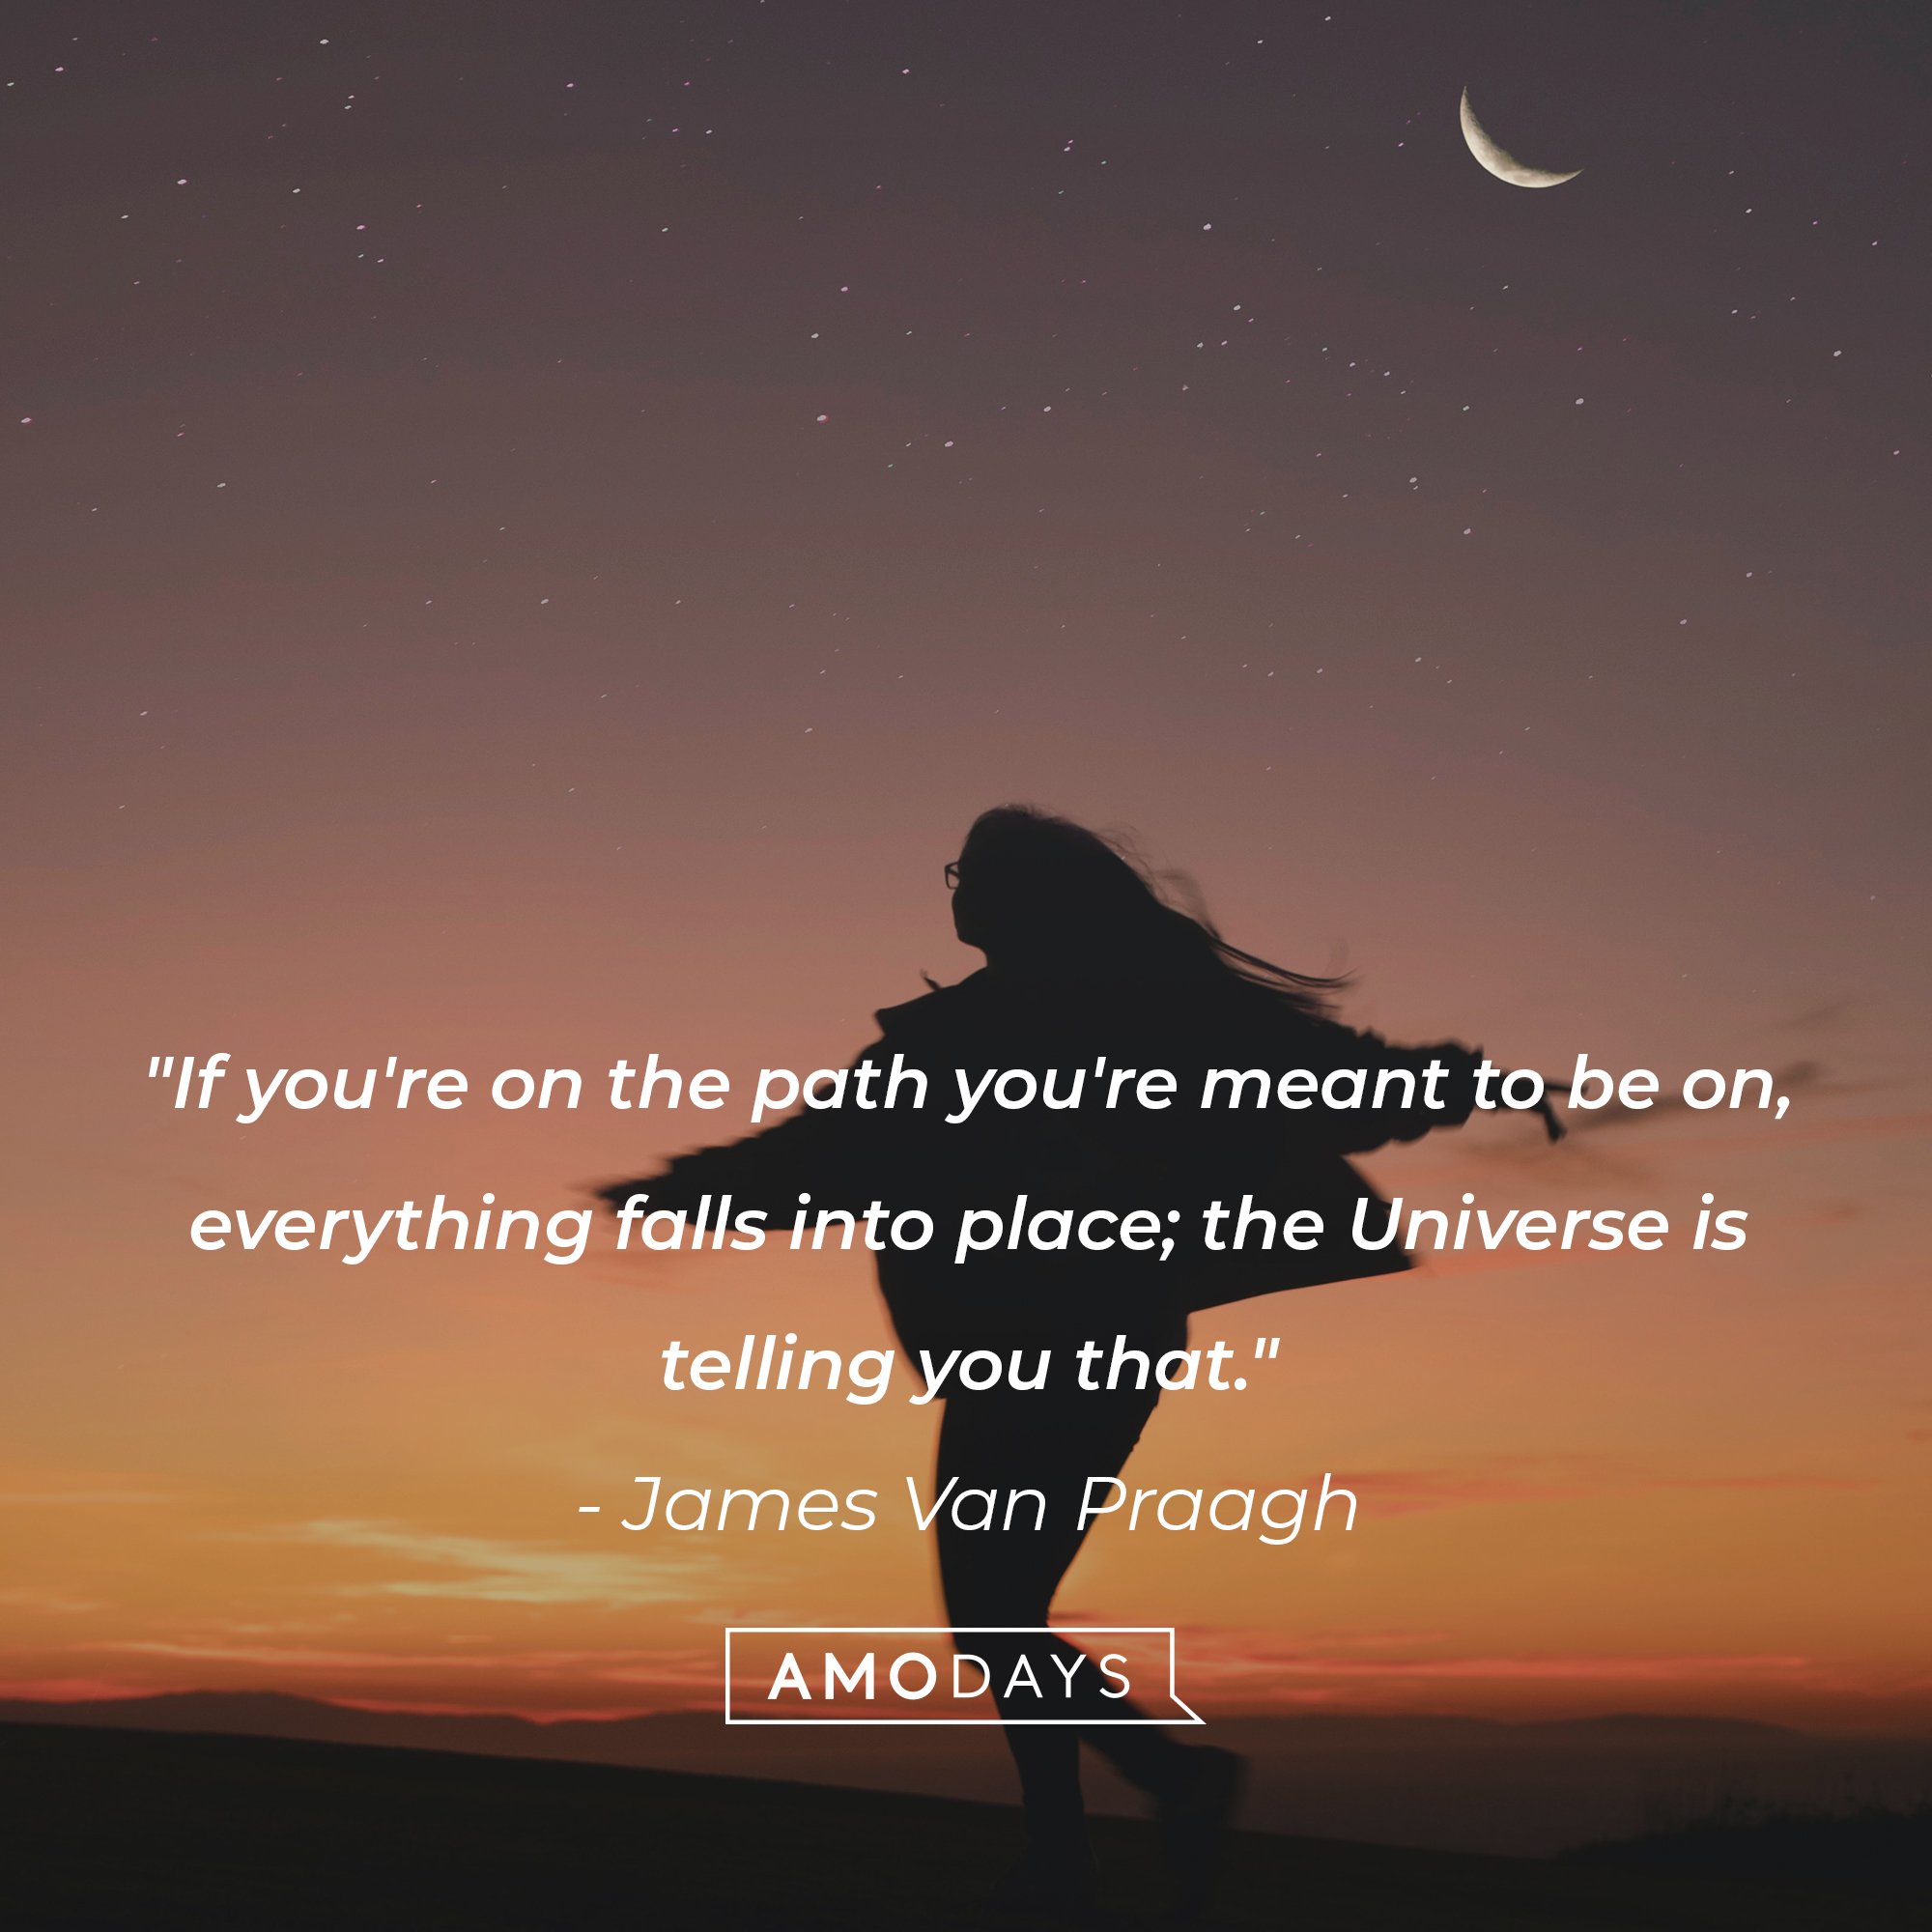  James Van Praagh’s quote: "If you're on the path you're meant to be on, everything falls into place; the Universe is telling you that." | Image: AmoDays 